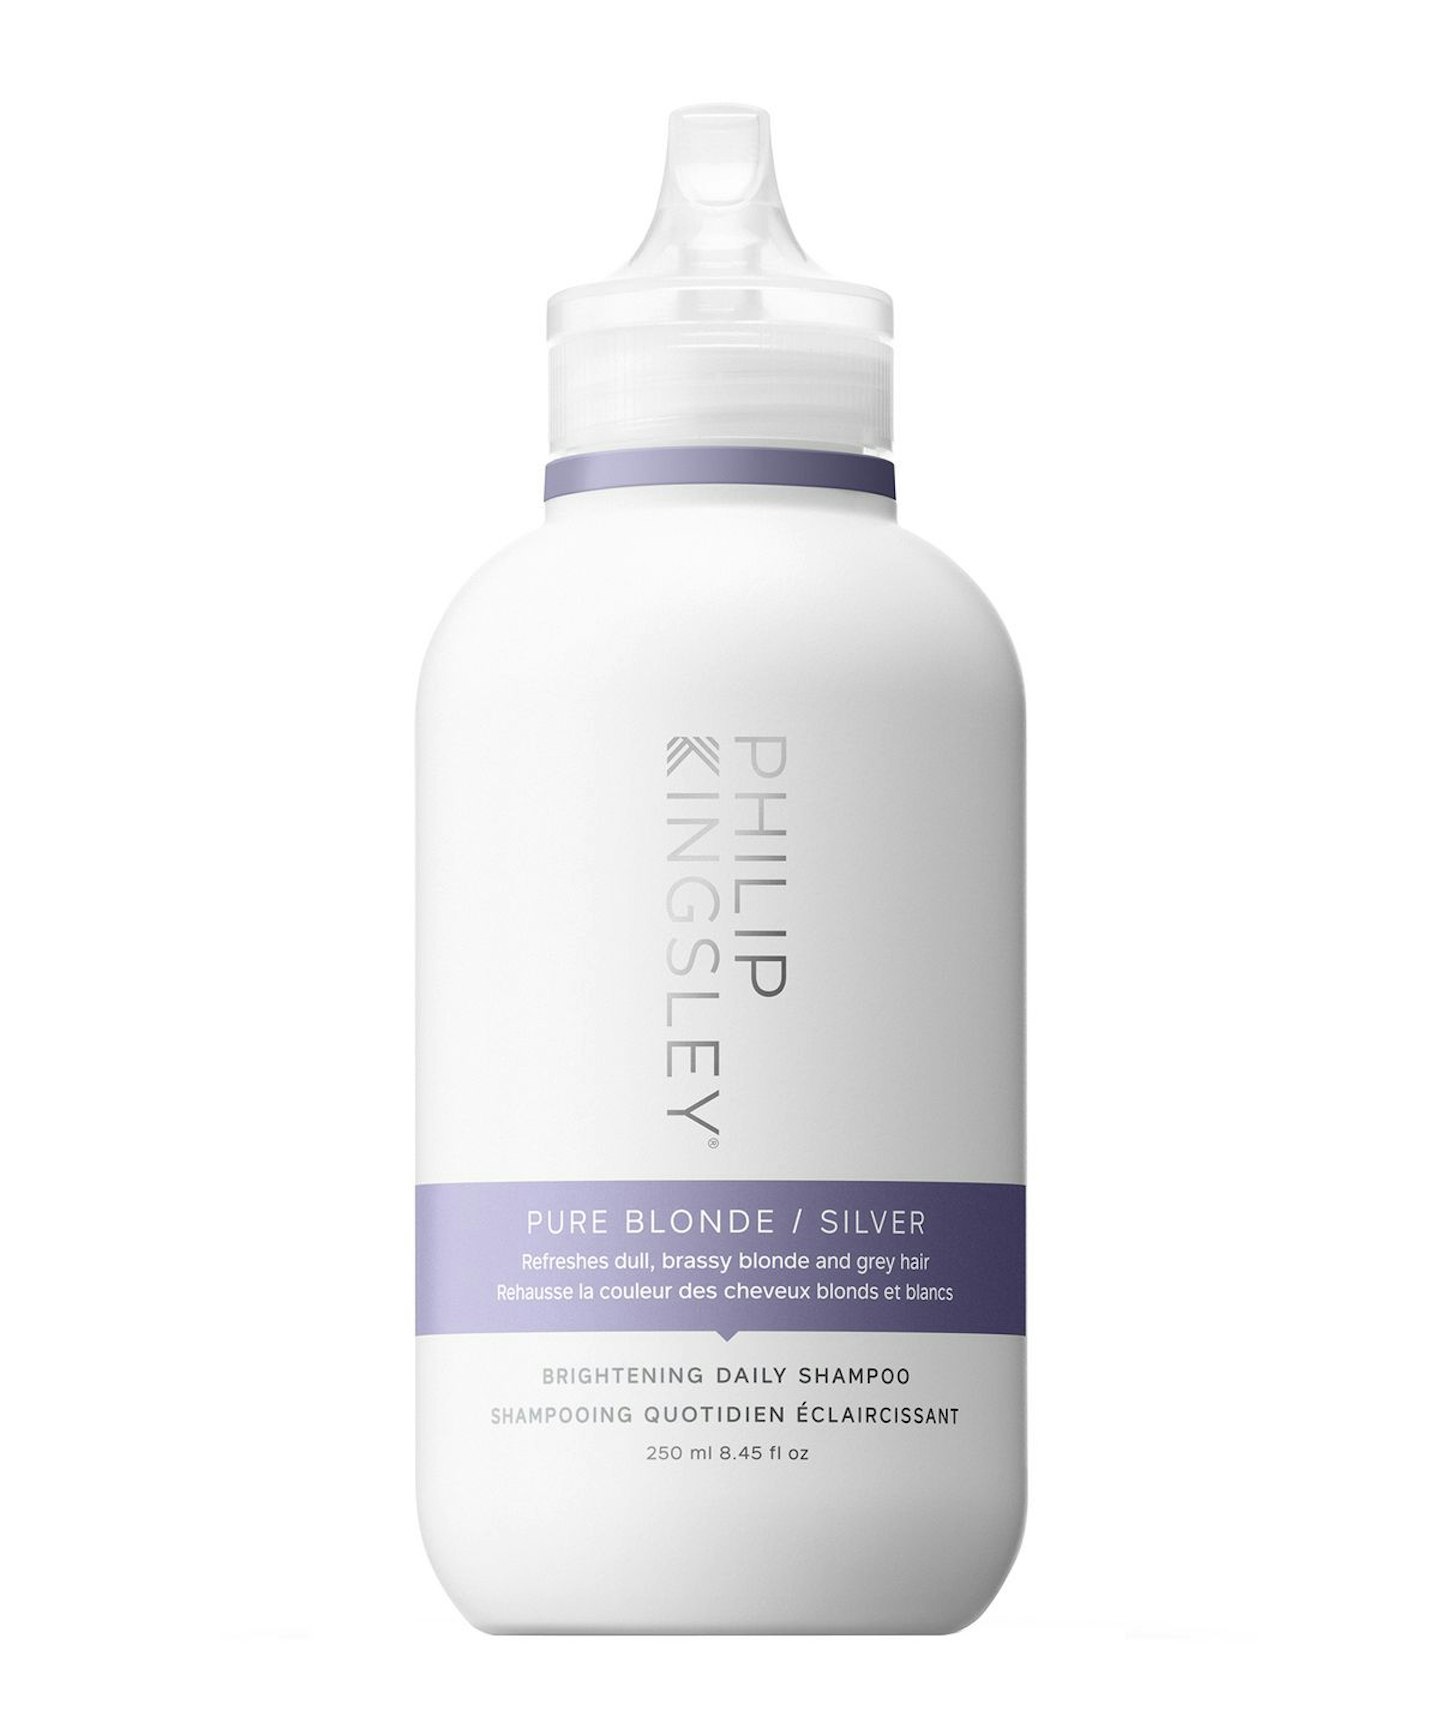 Philip Kingsley Pure Blonde/Silver Brightening Daily Shampoo, £20.50